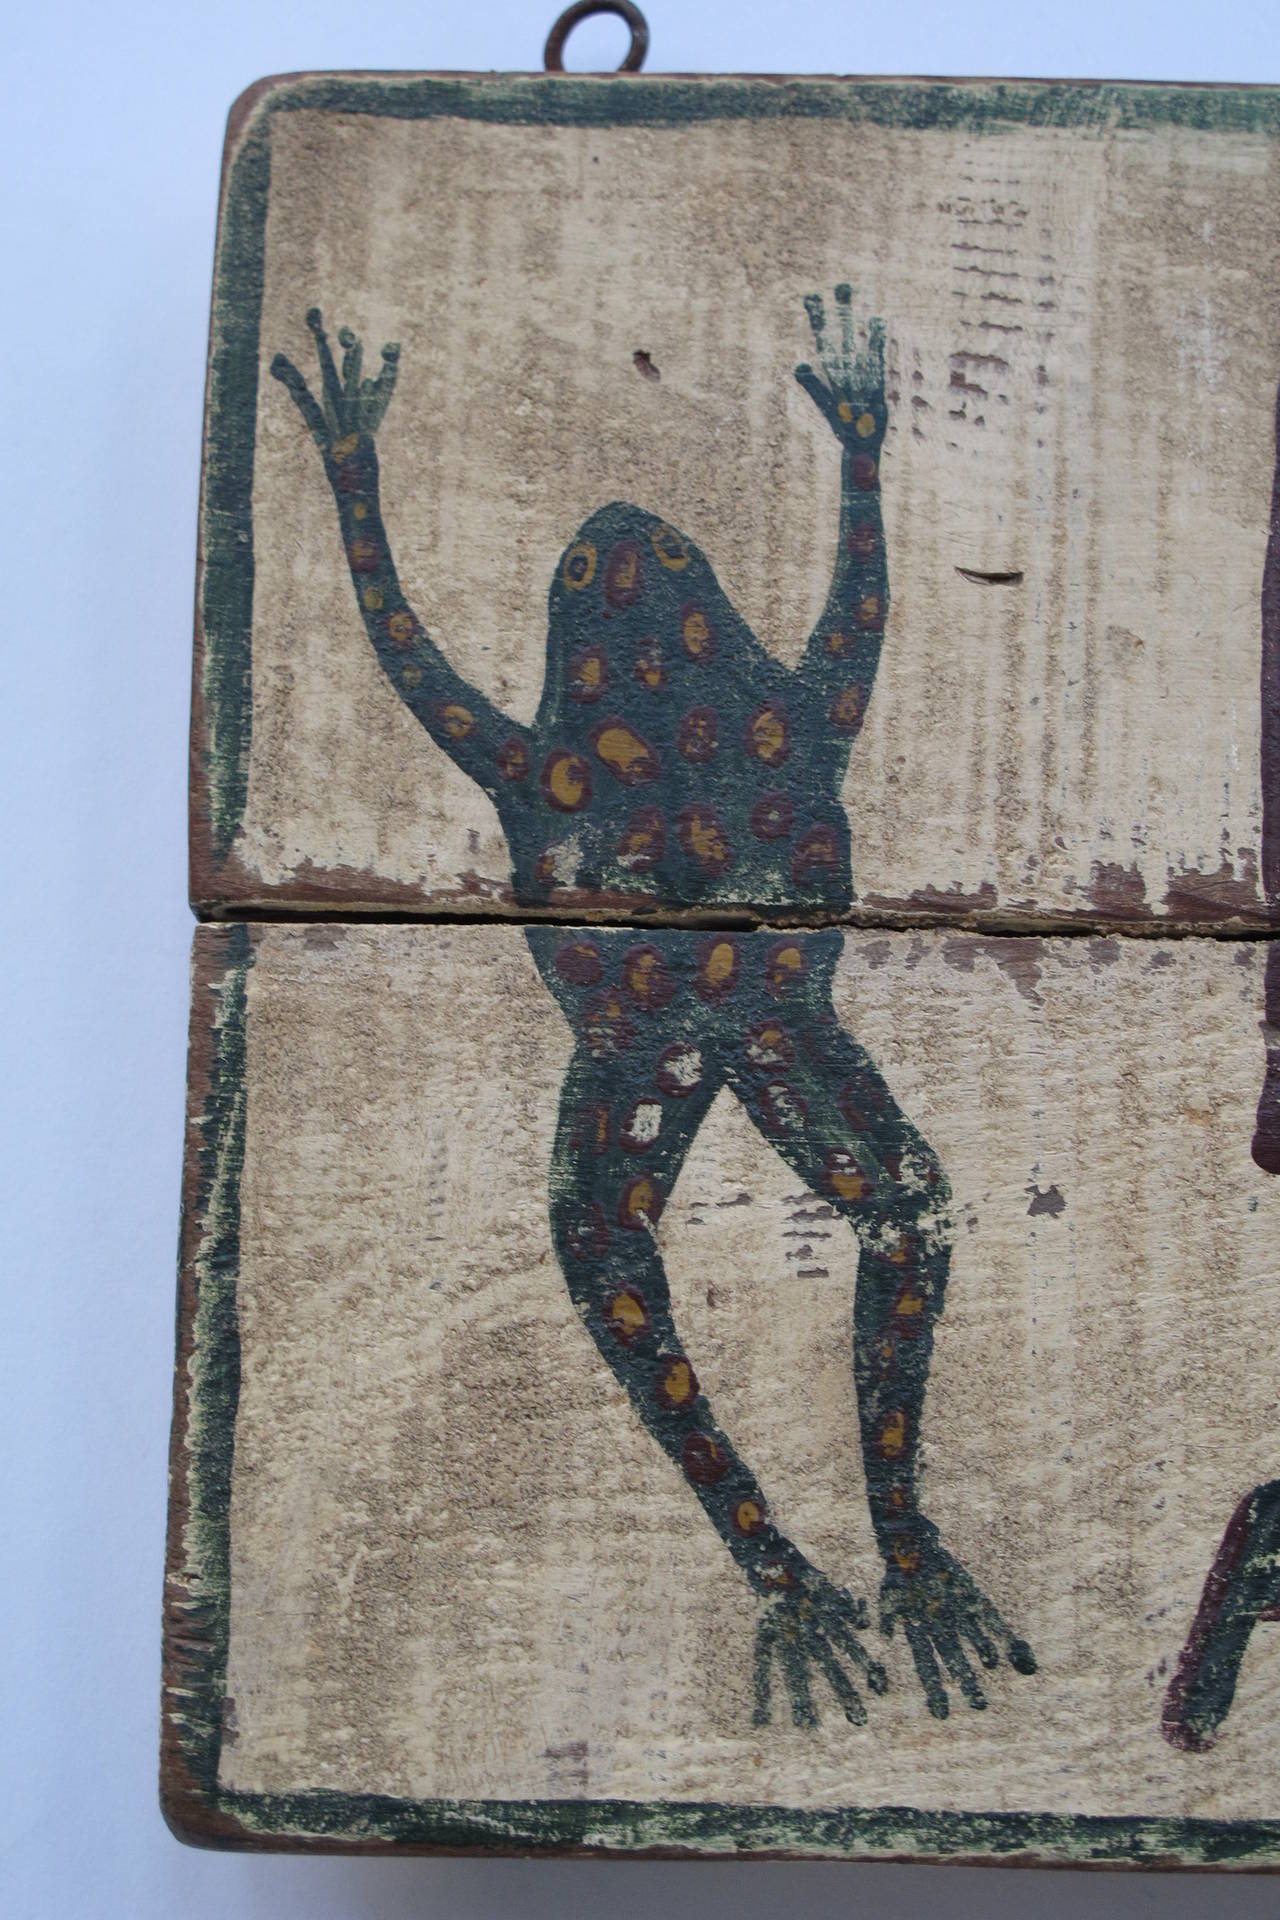 Wonderful old wooden sign with two painted leaping frogs and free-form lettering with frog pattern. I'm sure this is a one of a kind sign to let passerbys know that frogs were available. For what I can't be sure. I suppose as bait or for frog legs.